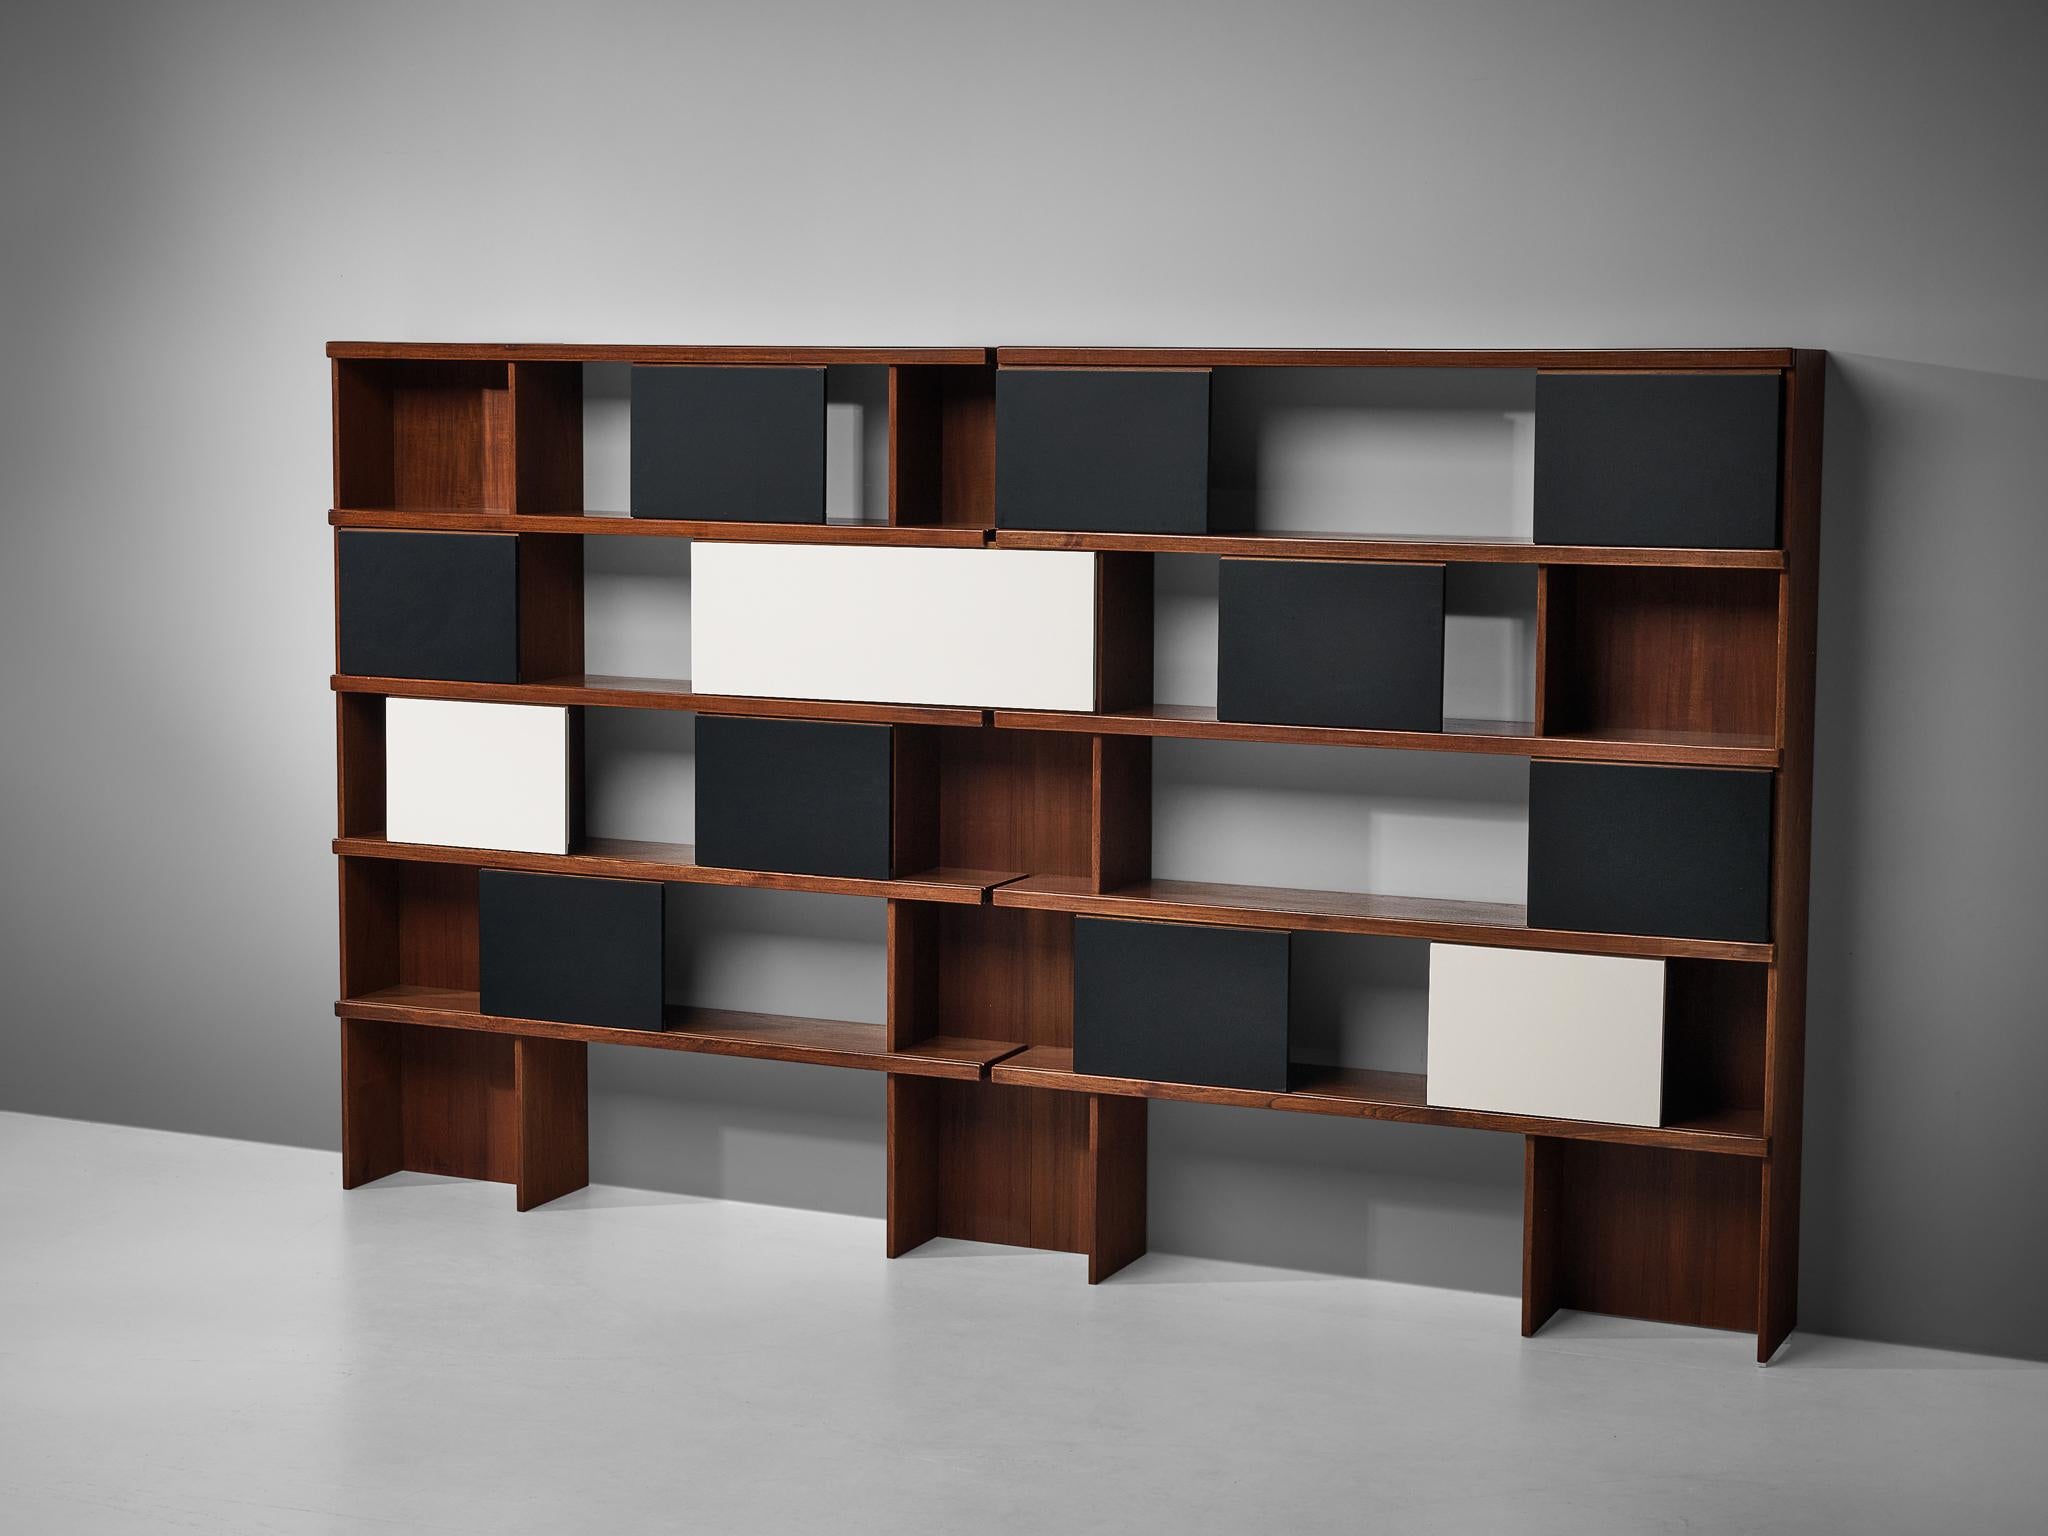 IImari Tapiovaara for Permanente Mobili Cantù, bookcase, teak, lacquered wood, Italy, circa 1957

This grand bookcase executed in teak is designed by the Finnish designer Ilmari Tapiovaara. Its grand appearence is emphasized by its width of 11.2